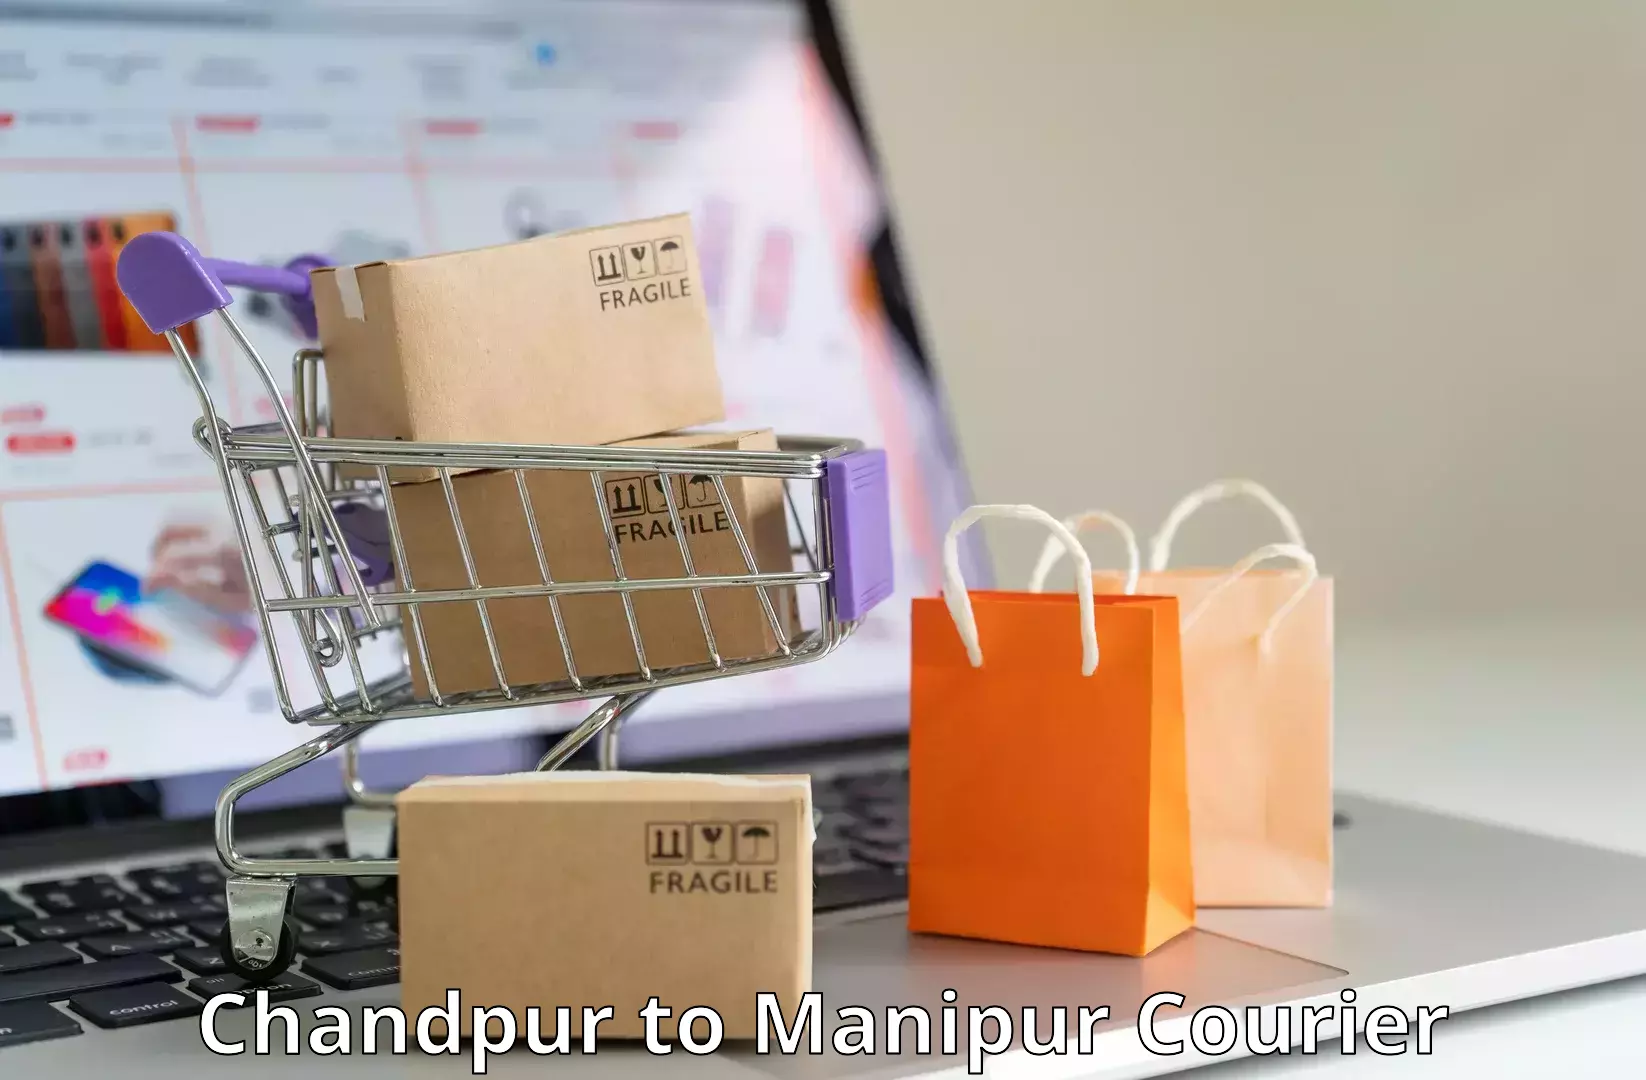 Same-day delivery solutions Chandpur to Manipur